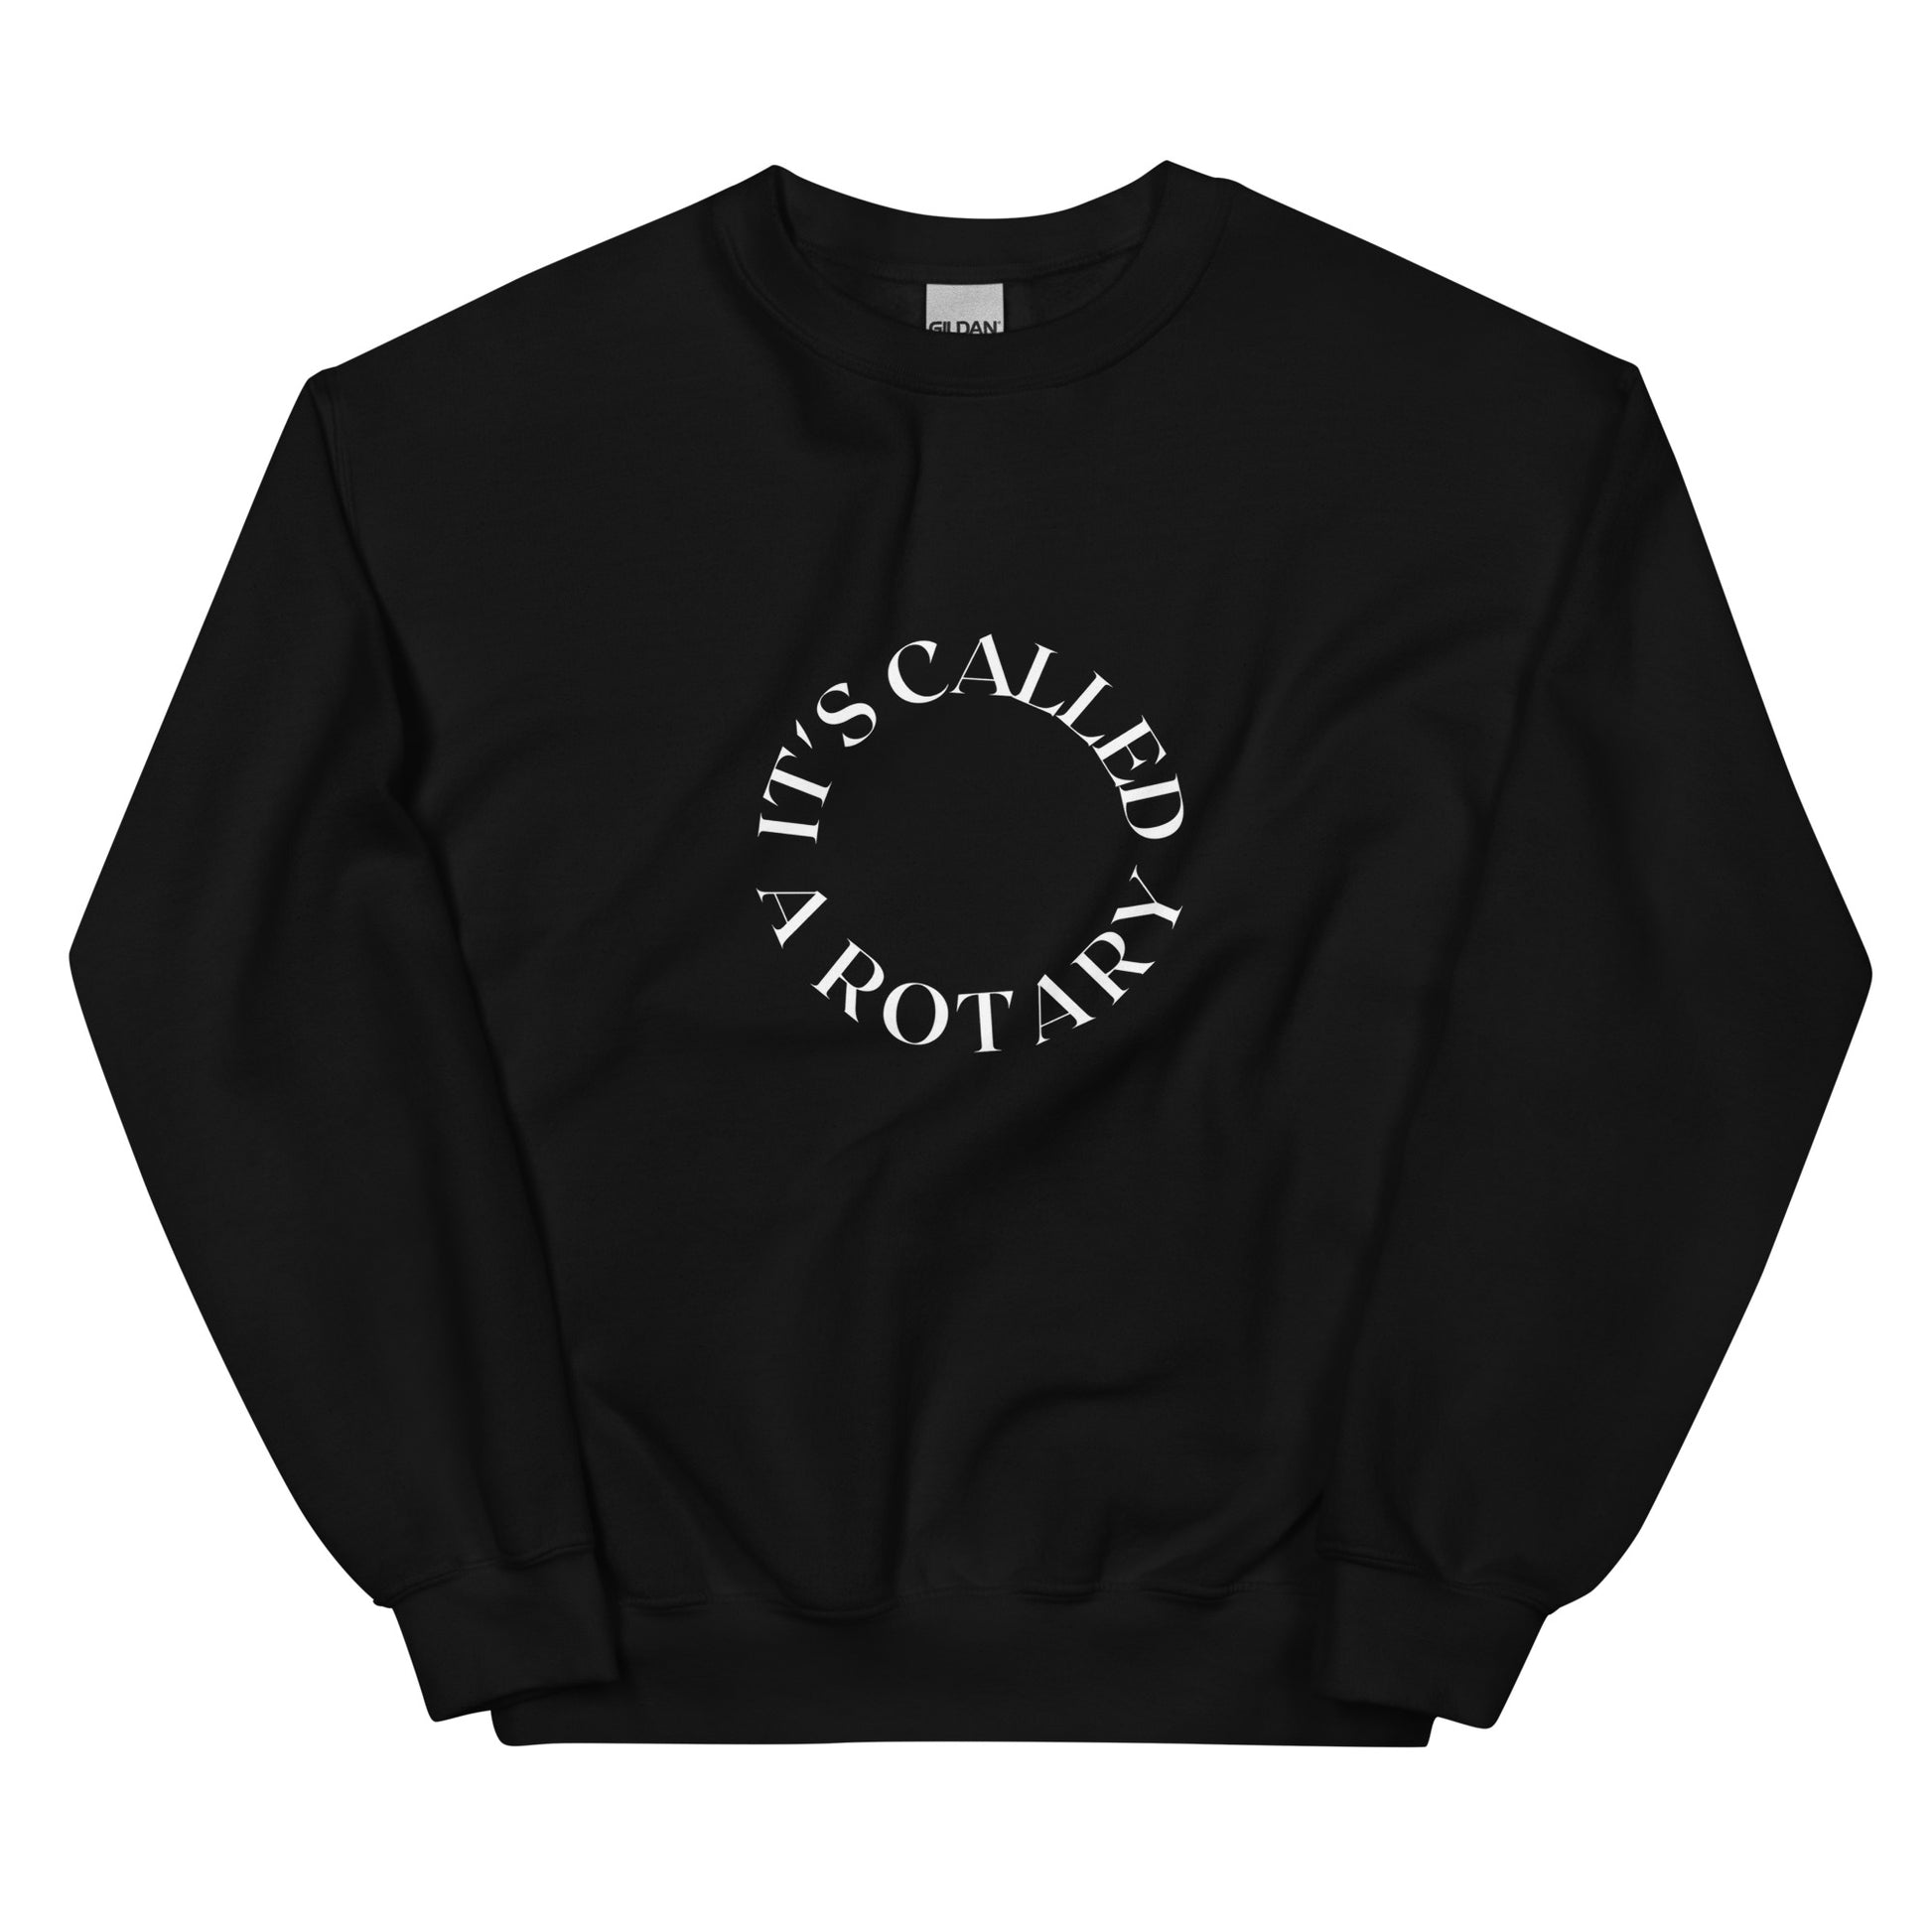 black crewneck that says "it's called a rotary" in white lettering shaped in a circle